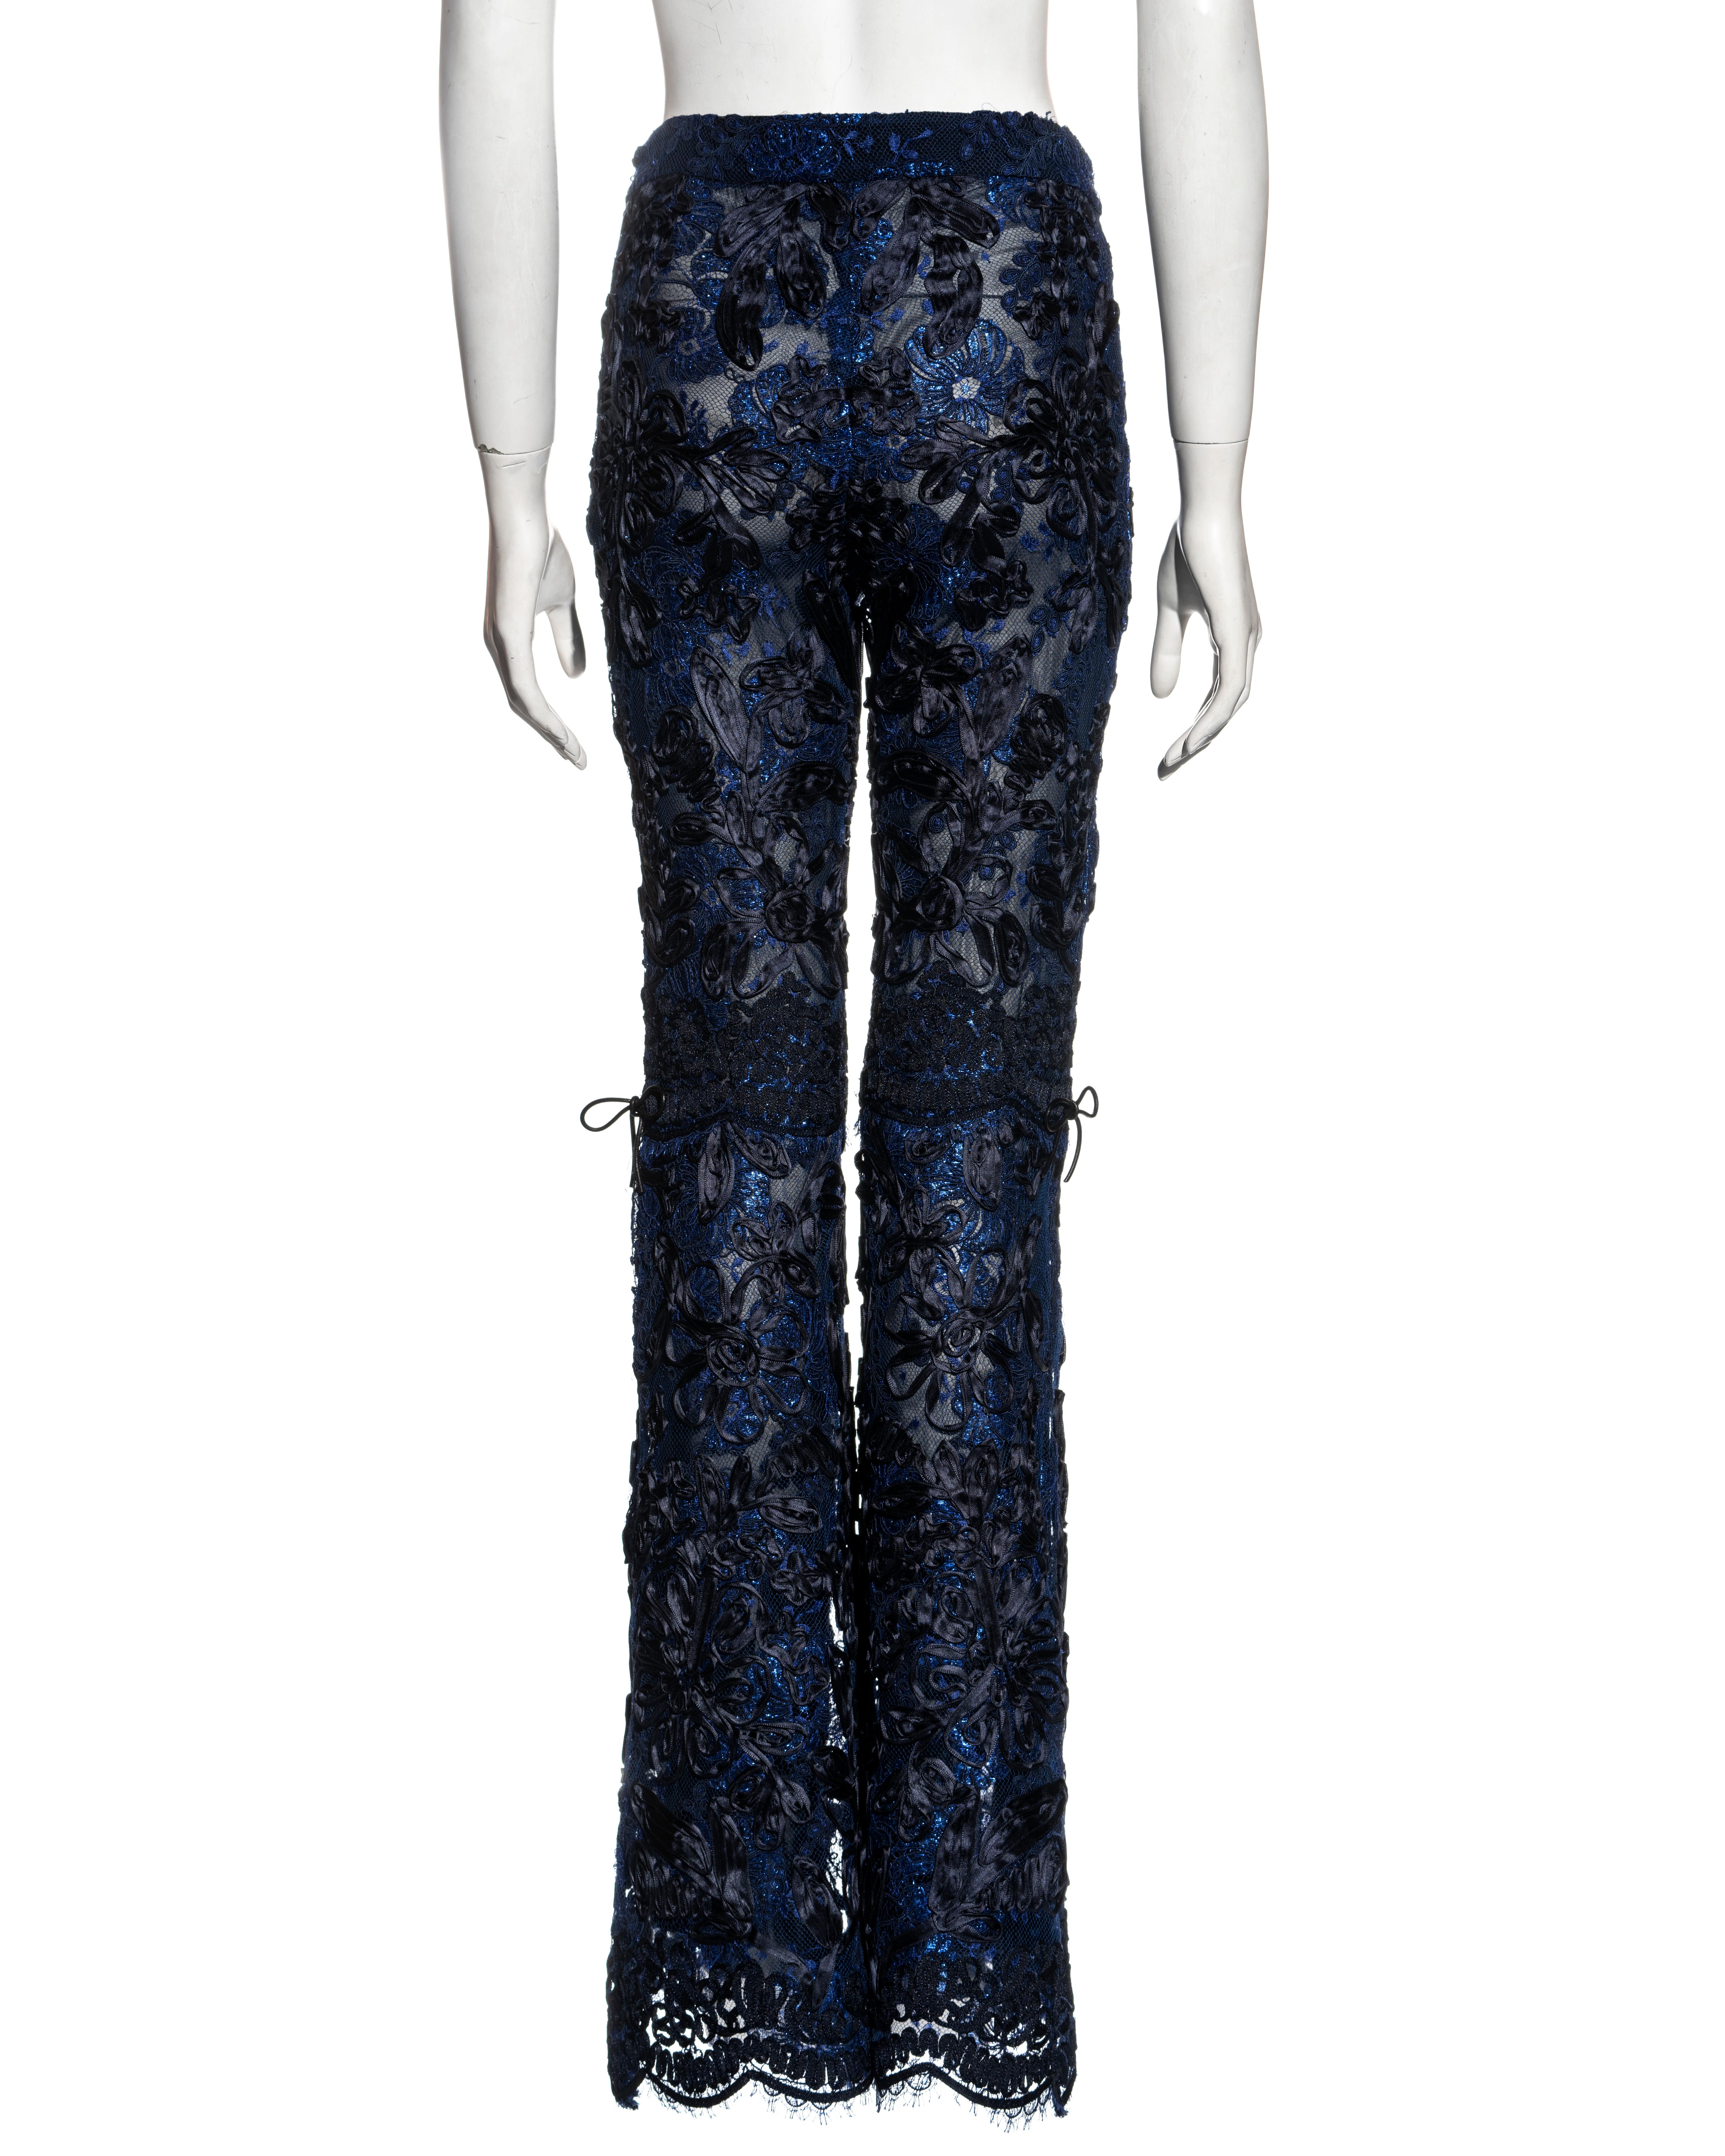 Gucci by Tom Ford blue and black lamé floral lace flared pants, fw 1999 For Sale 4